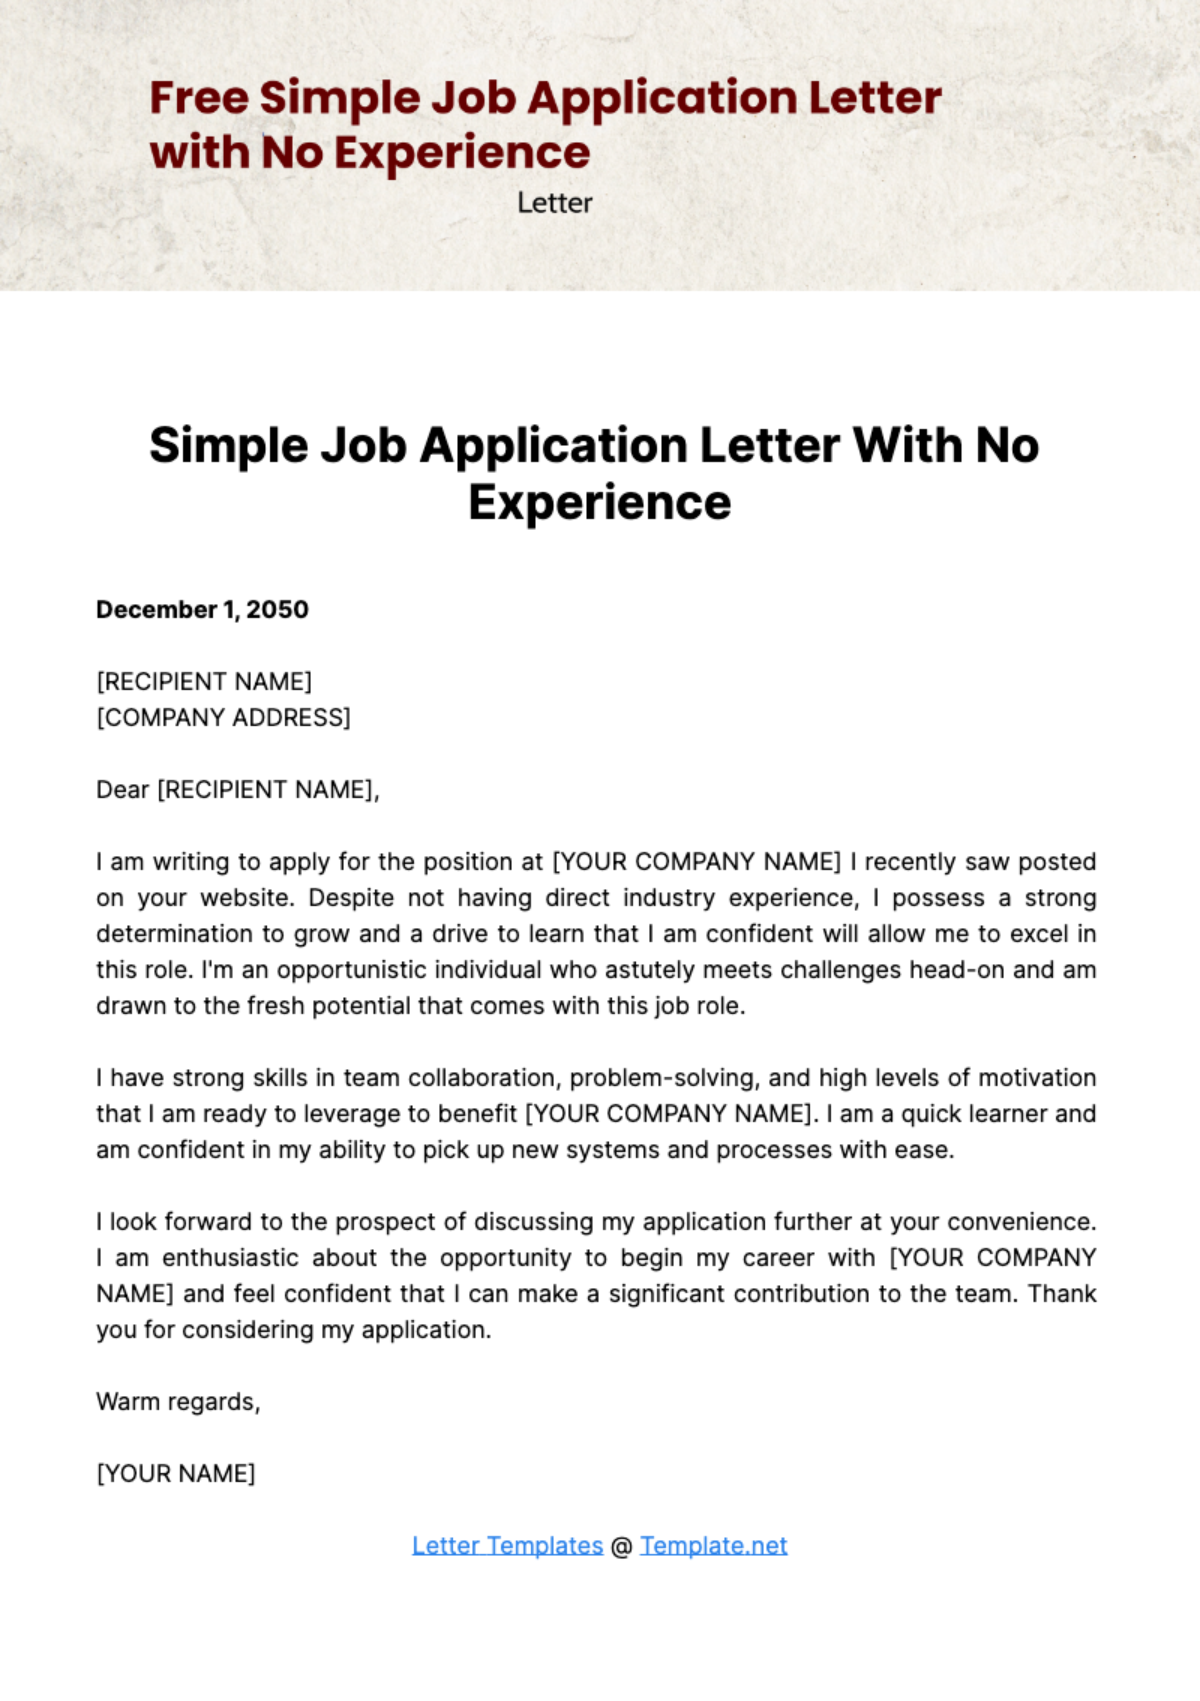 Free Simple Job Application Letter with No Experience Template